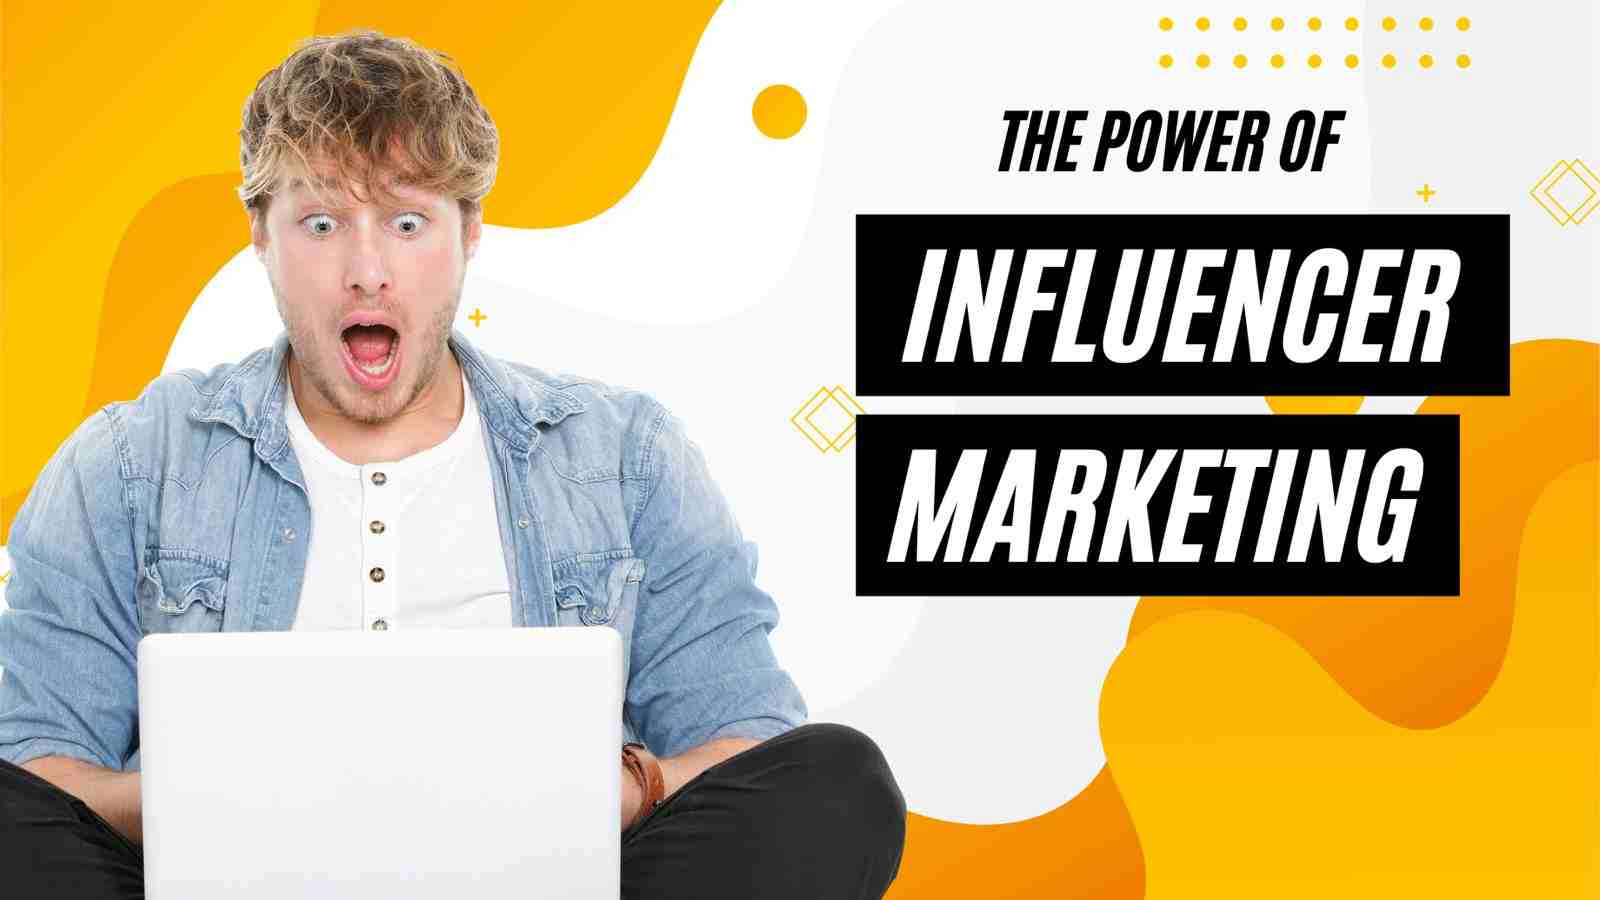 The power of influencer marketing